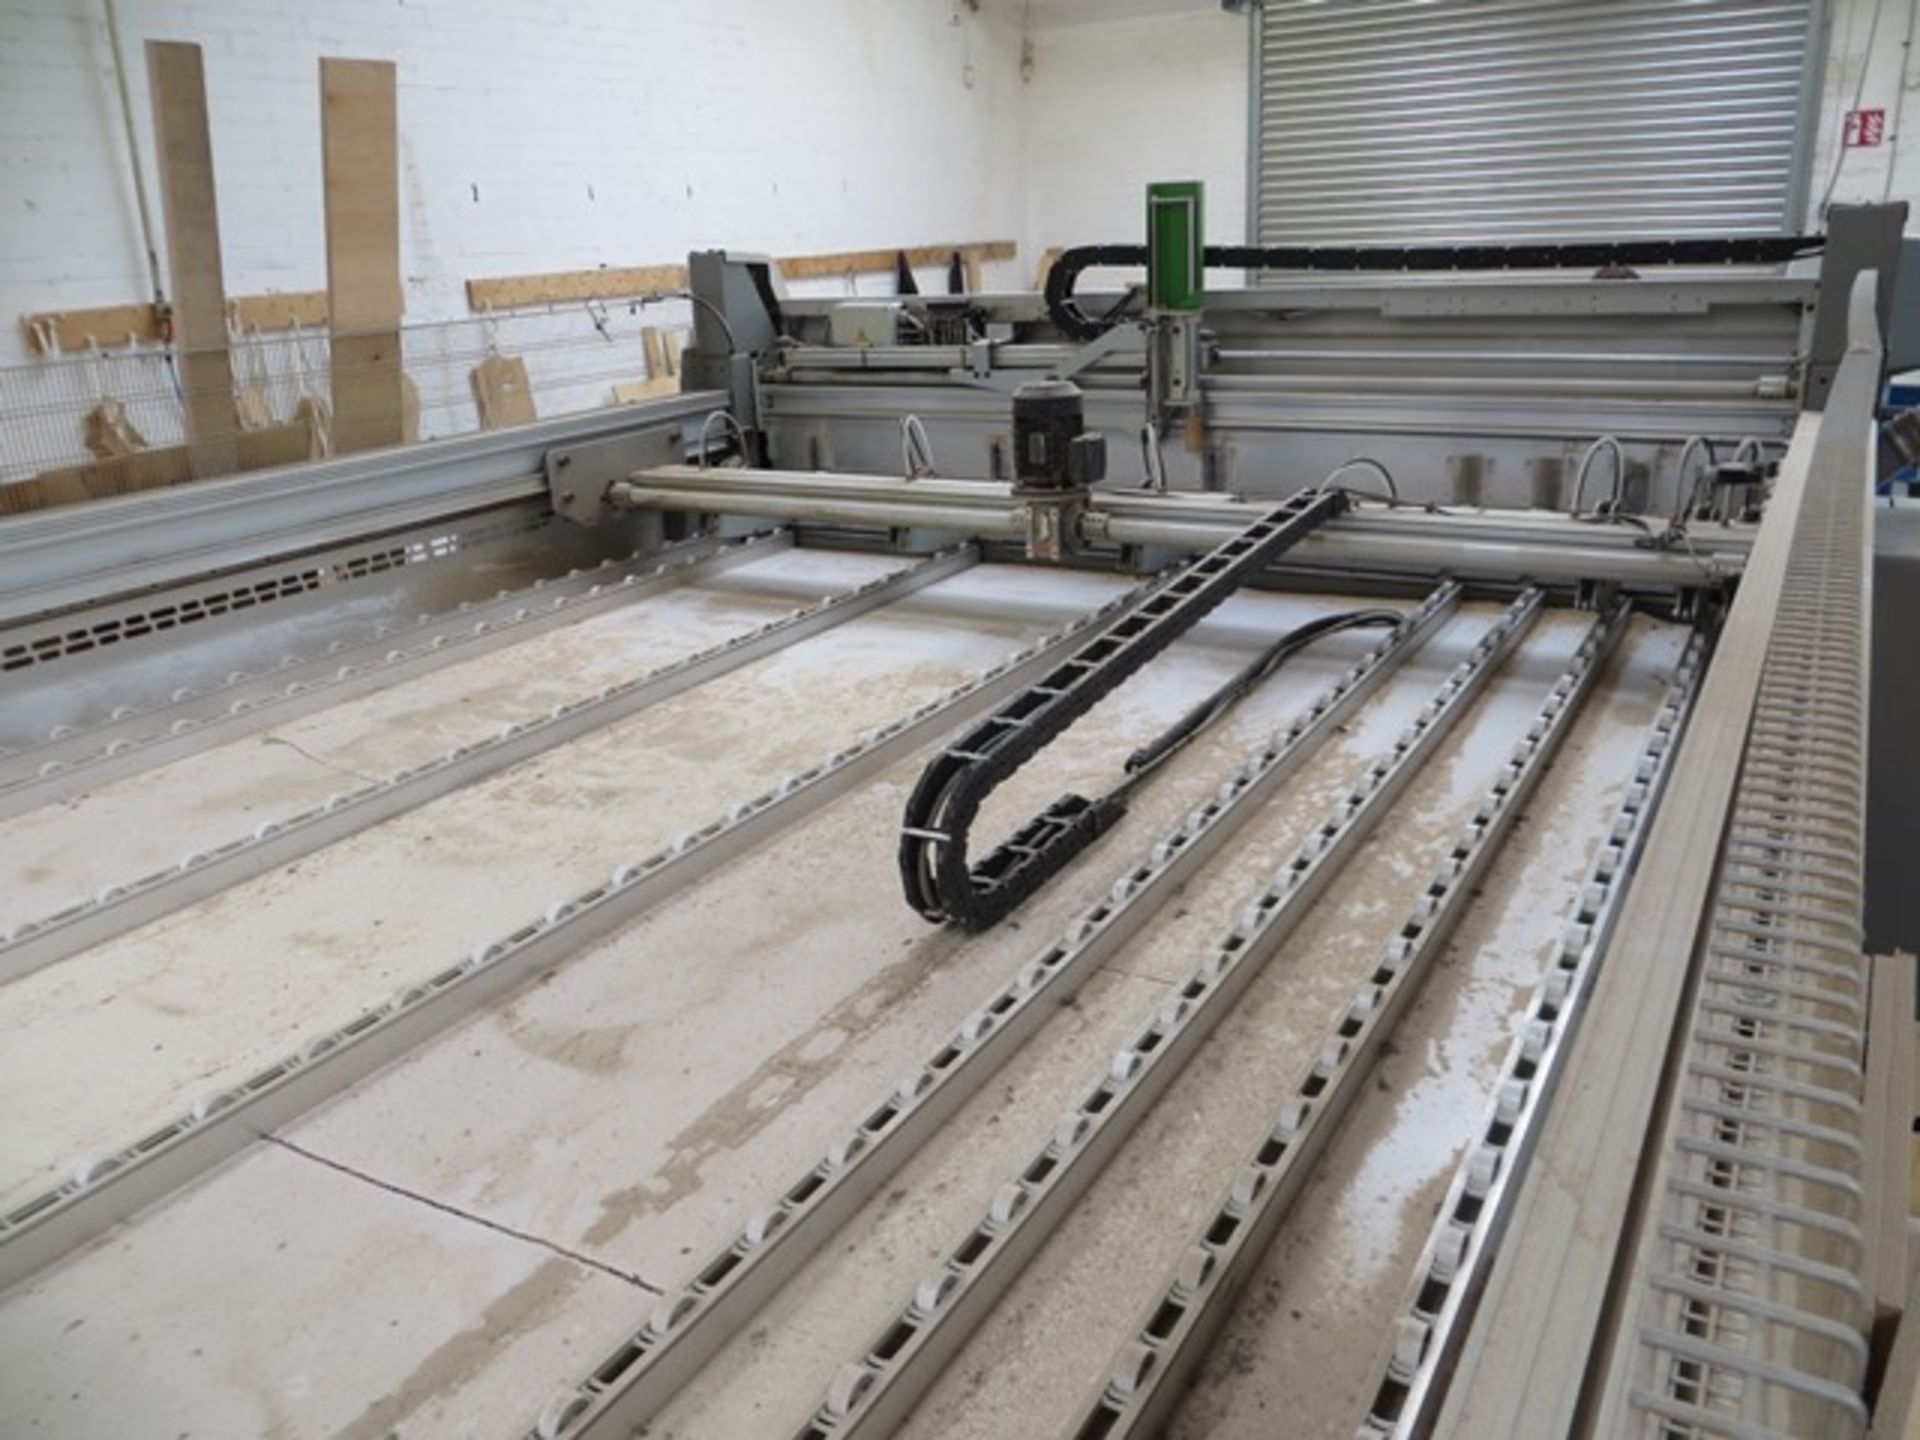 Selco EB70 CNC beam saw with Selco EB DRO side and middle airflow tables, max capacity 2700kg x 3 - Image 4 of 5